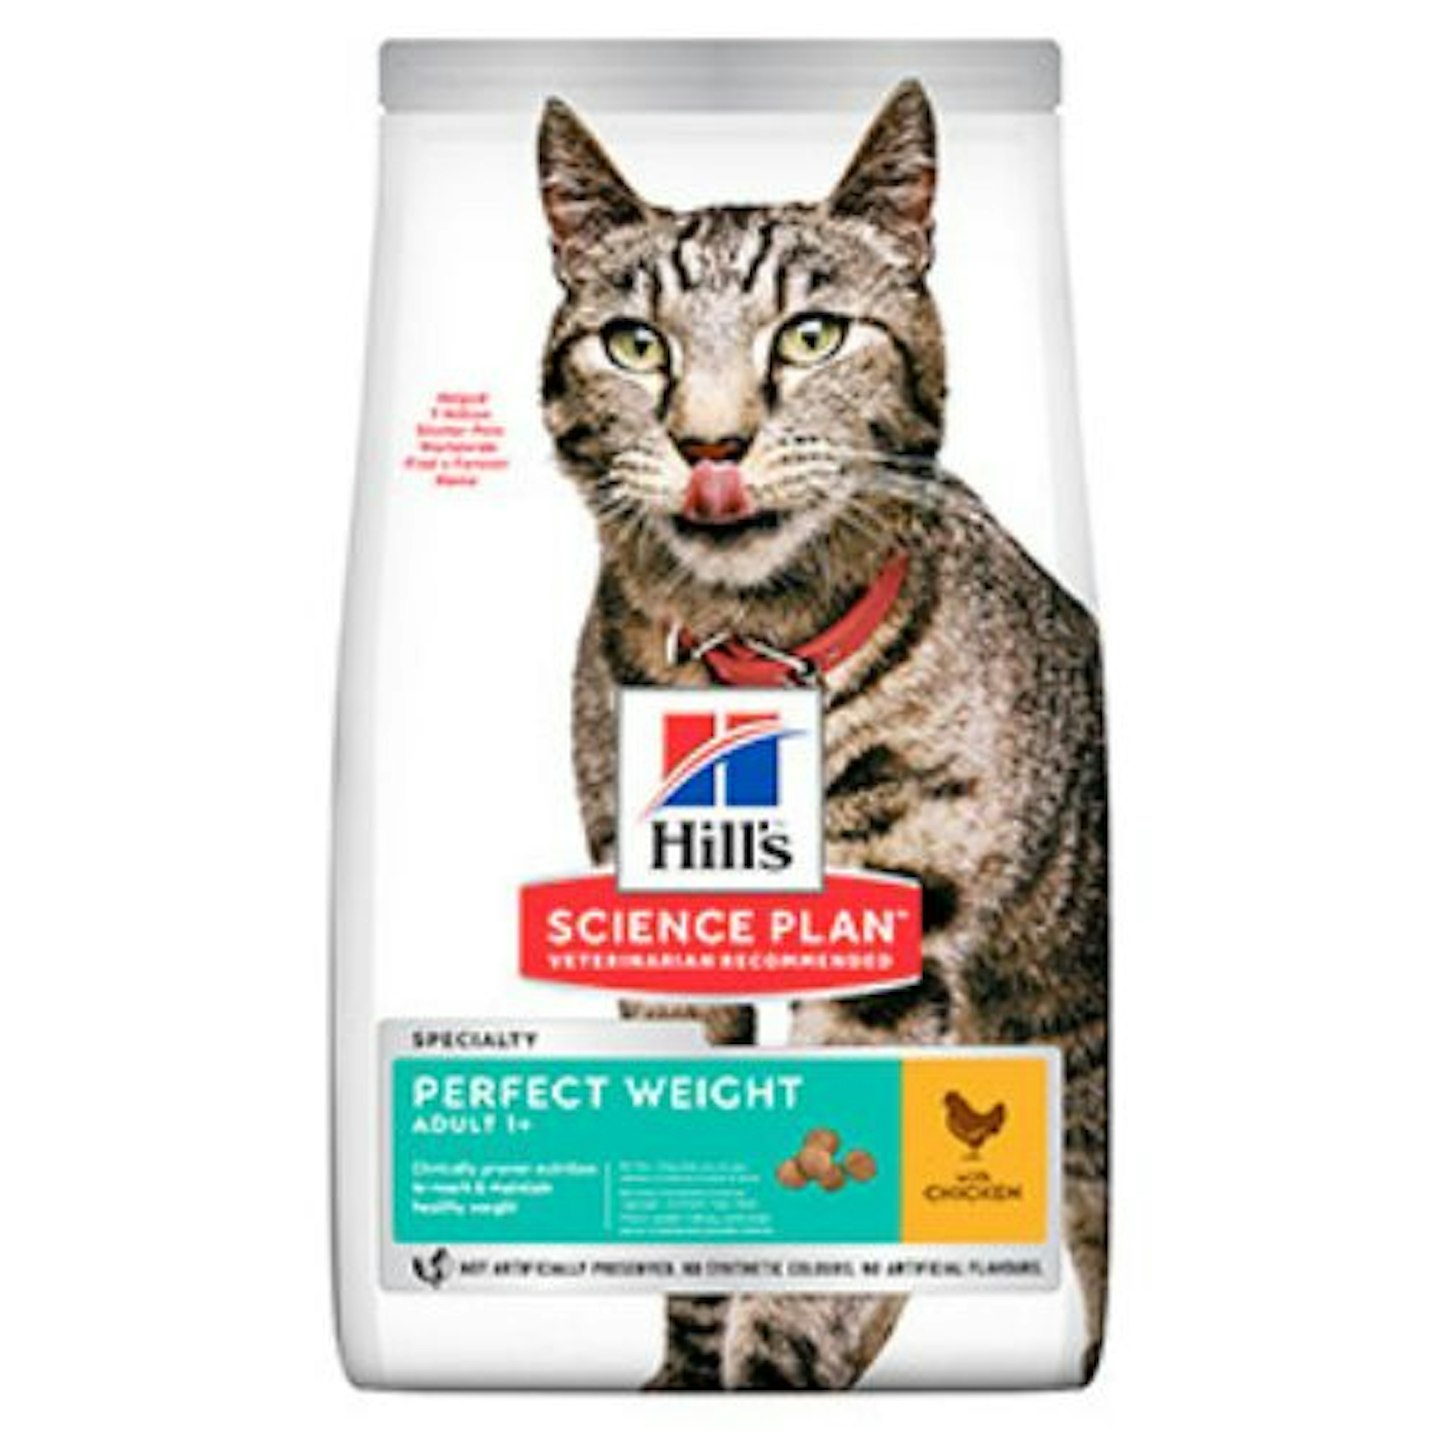 Hill's Science Plan Perfect Weight Dry Adult Cat Food with Chicken